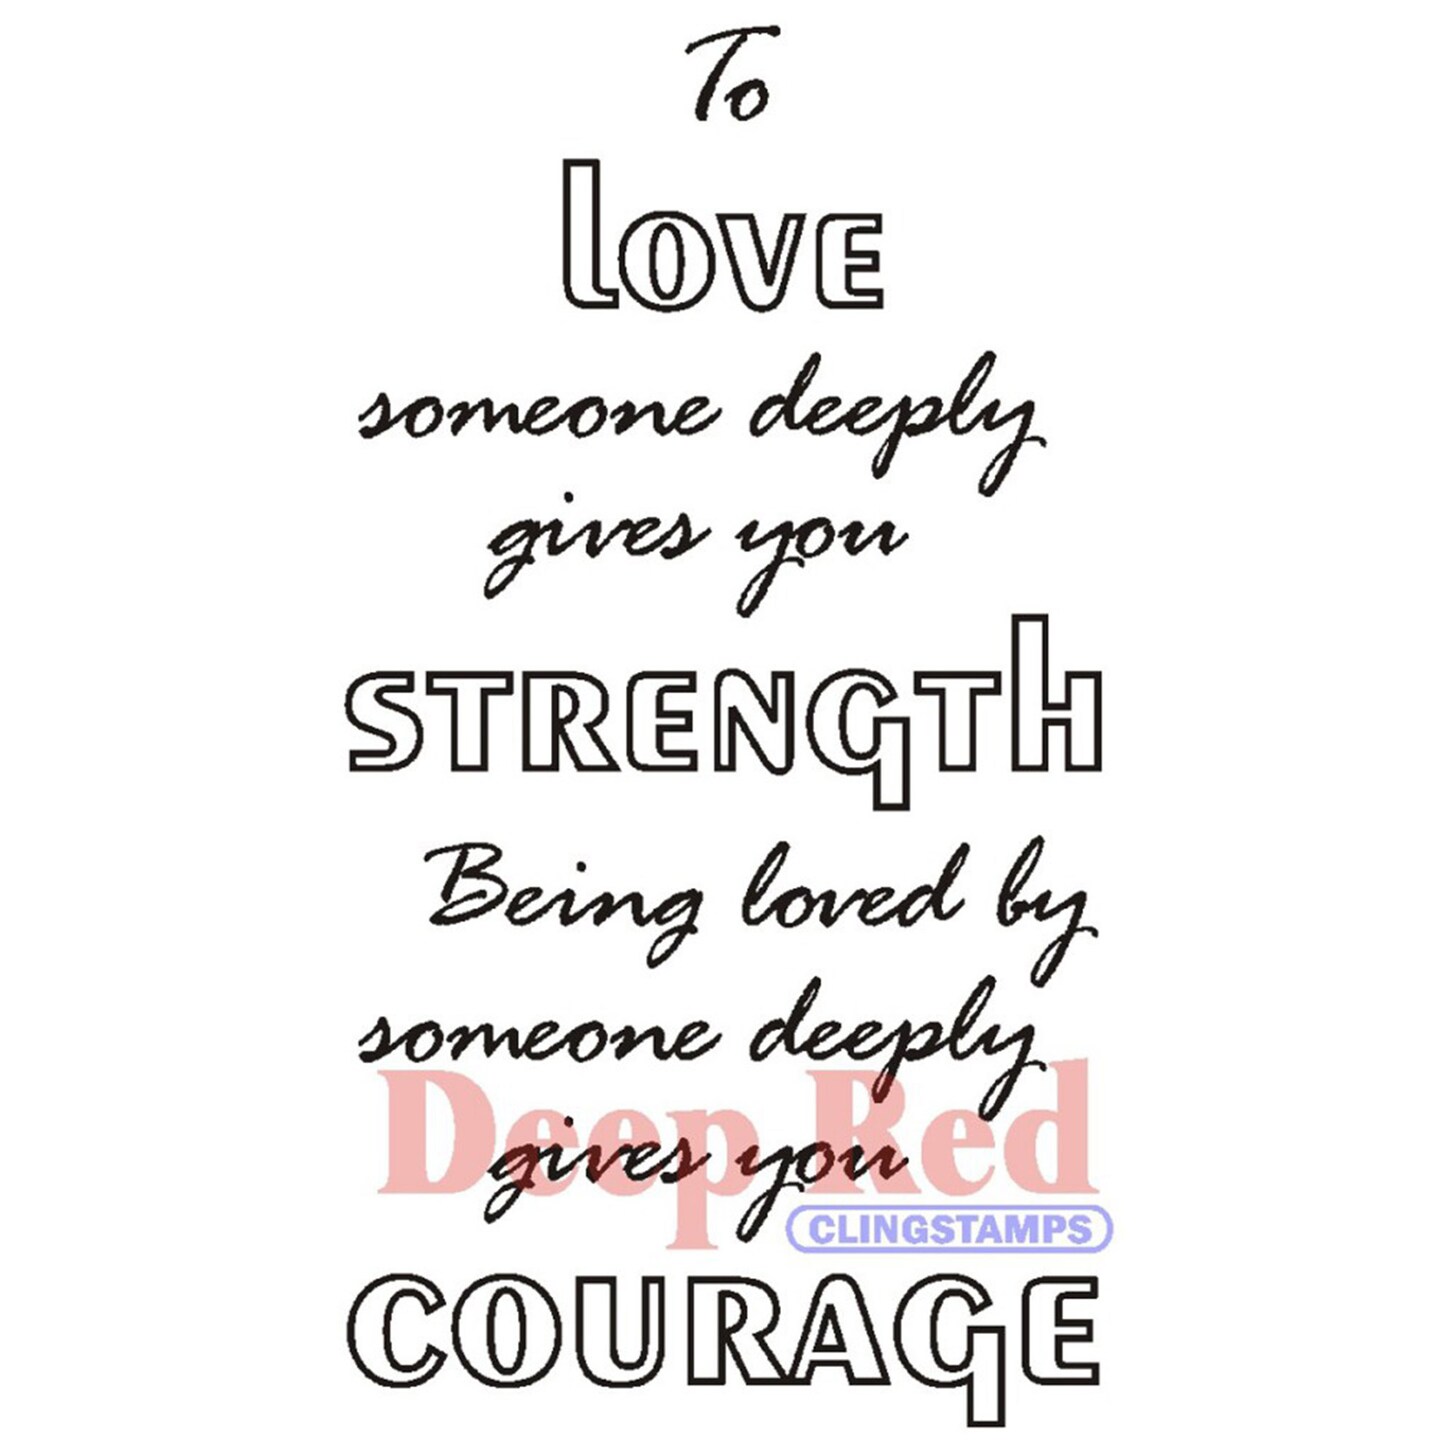 Deep Red Stamps Love Strength Courage Rubber Cling Stamp 2.25 x 4.25 inches